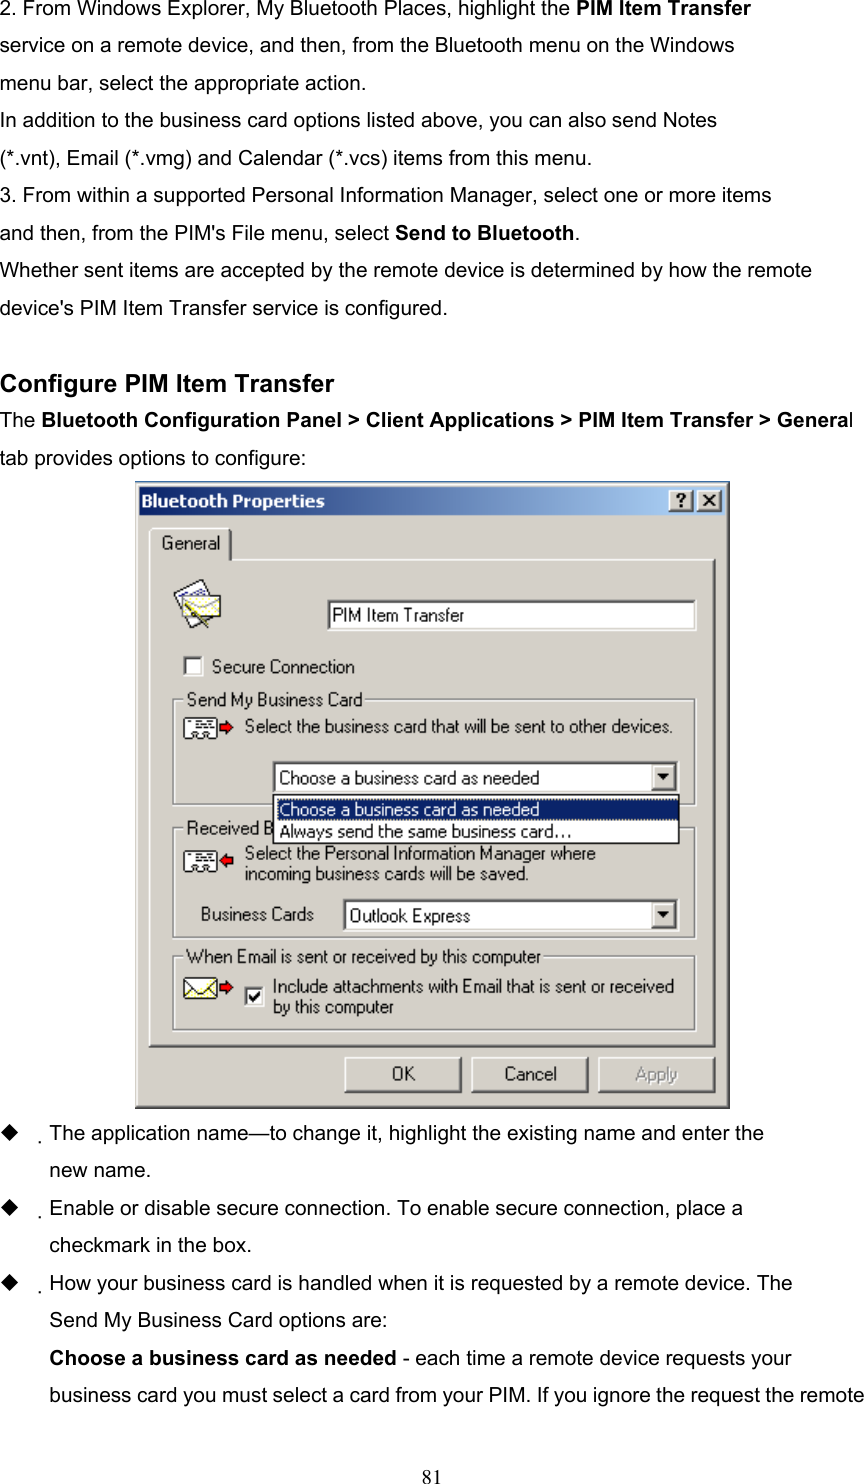 2. From Windows Explorer, My Bluetooth Places, highlight the PIM Item Transfer service on a remote device, and then, from the Bluetooth menu on the Windows menu bar, select the appropriate action. In addition to the business card options listed above, you can also send Notes (*.vnt), Email (*.vmg) and Calendar (*.vcs) items from this menu. 3. From within a supported Personal Information Manager, select one or more items and then, from the PIM&apos;s File menu, select Send to Bluetooth. Whether sent items are accepted by the remote device is determined by how the remote device&apos;s PIM Item Transfer service is configured.  Configure PIM Item Transfer The Bluetooth Configuration Panel &gt; Client Applications &gt; PIM Item Transfer &gt; General tab provides options to configure:    The application name—to change it, highlight the existing name and enter the new name.   Enable or disable secure connection. To enable secure connection, place a checkmark in the box.   How your business card is handled when it is requested by a remote device. The Send My Business Card options are: Choose a business card as needed - each time a remote device requests your business card you must select a card from your PIM. If you ignore the request the remote  81 